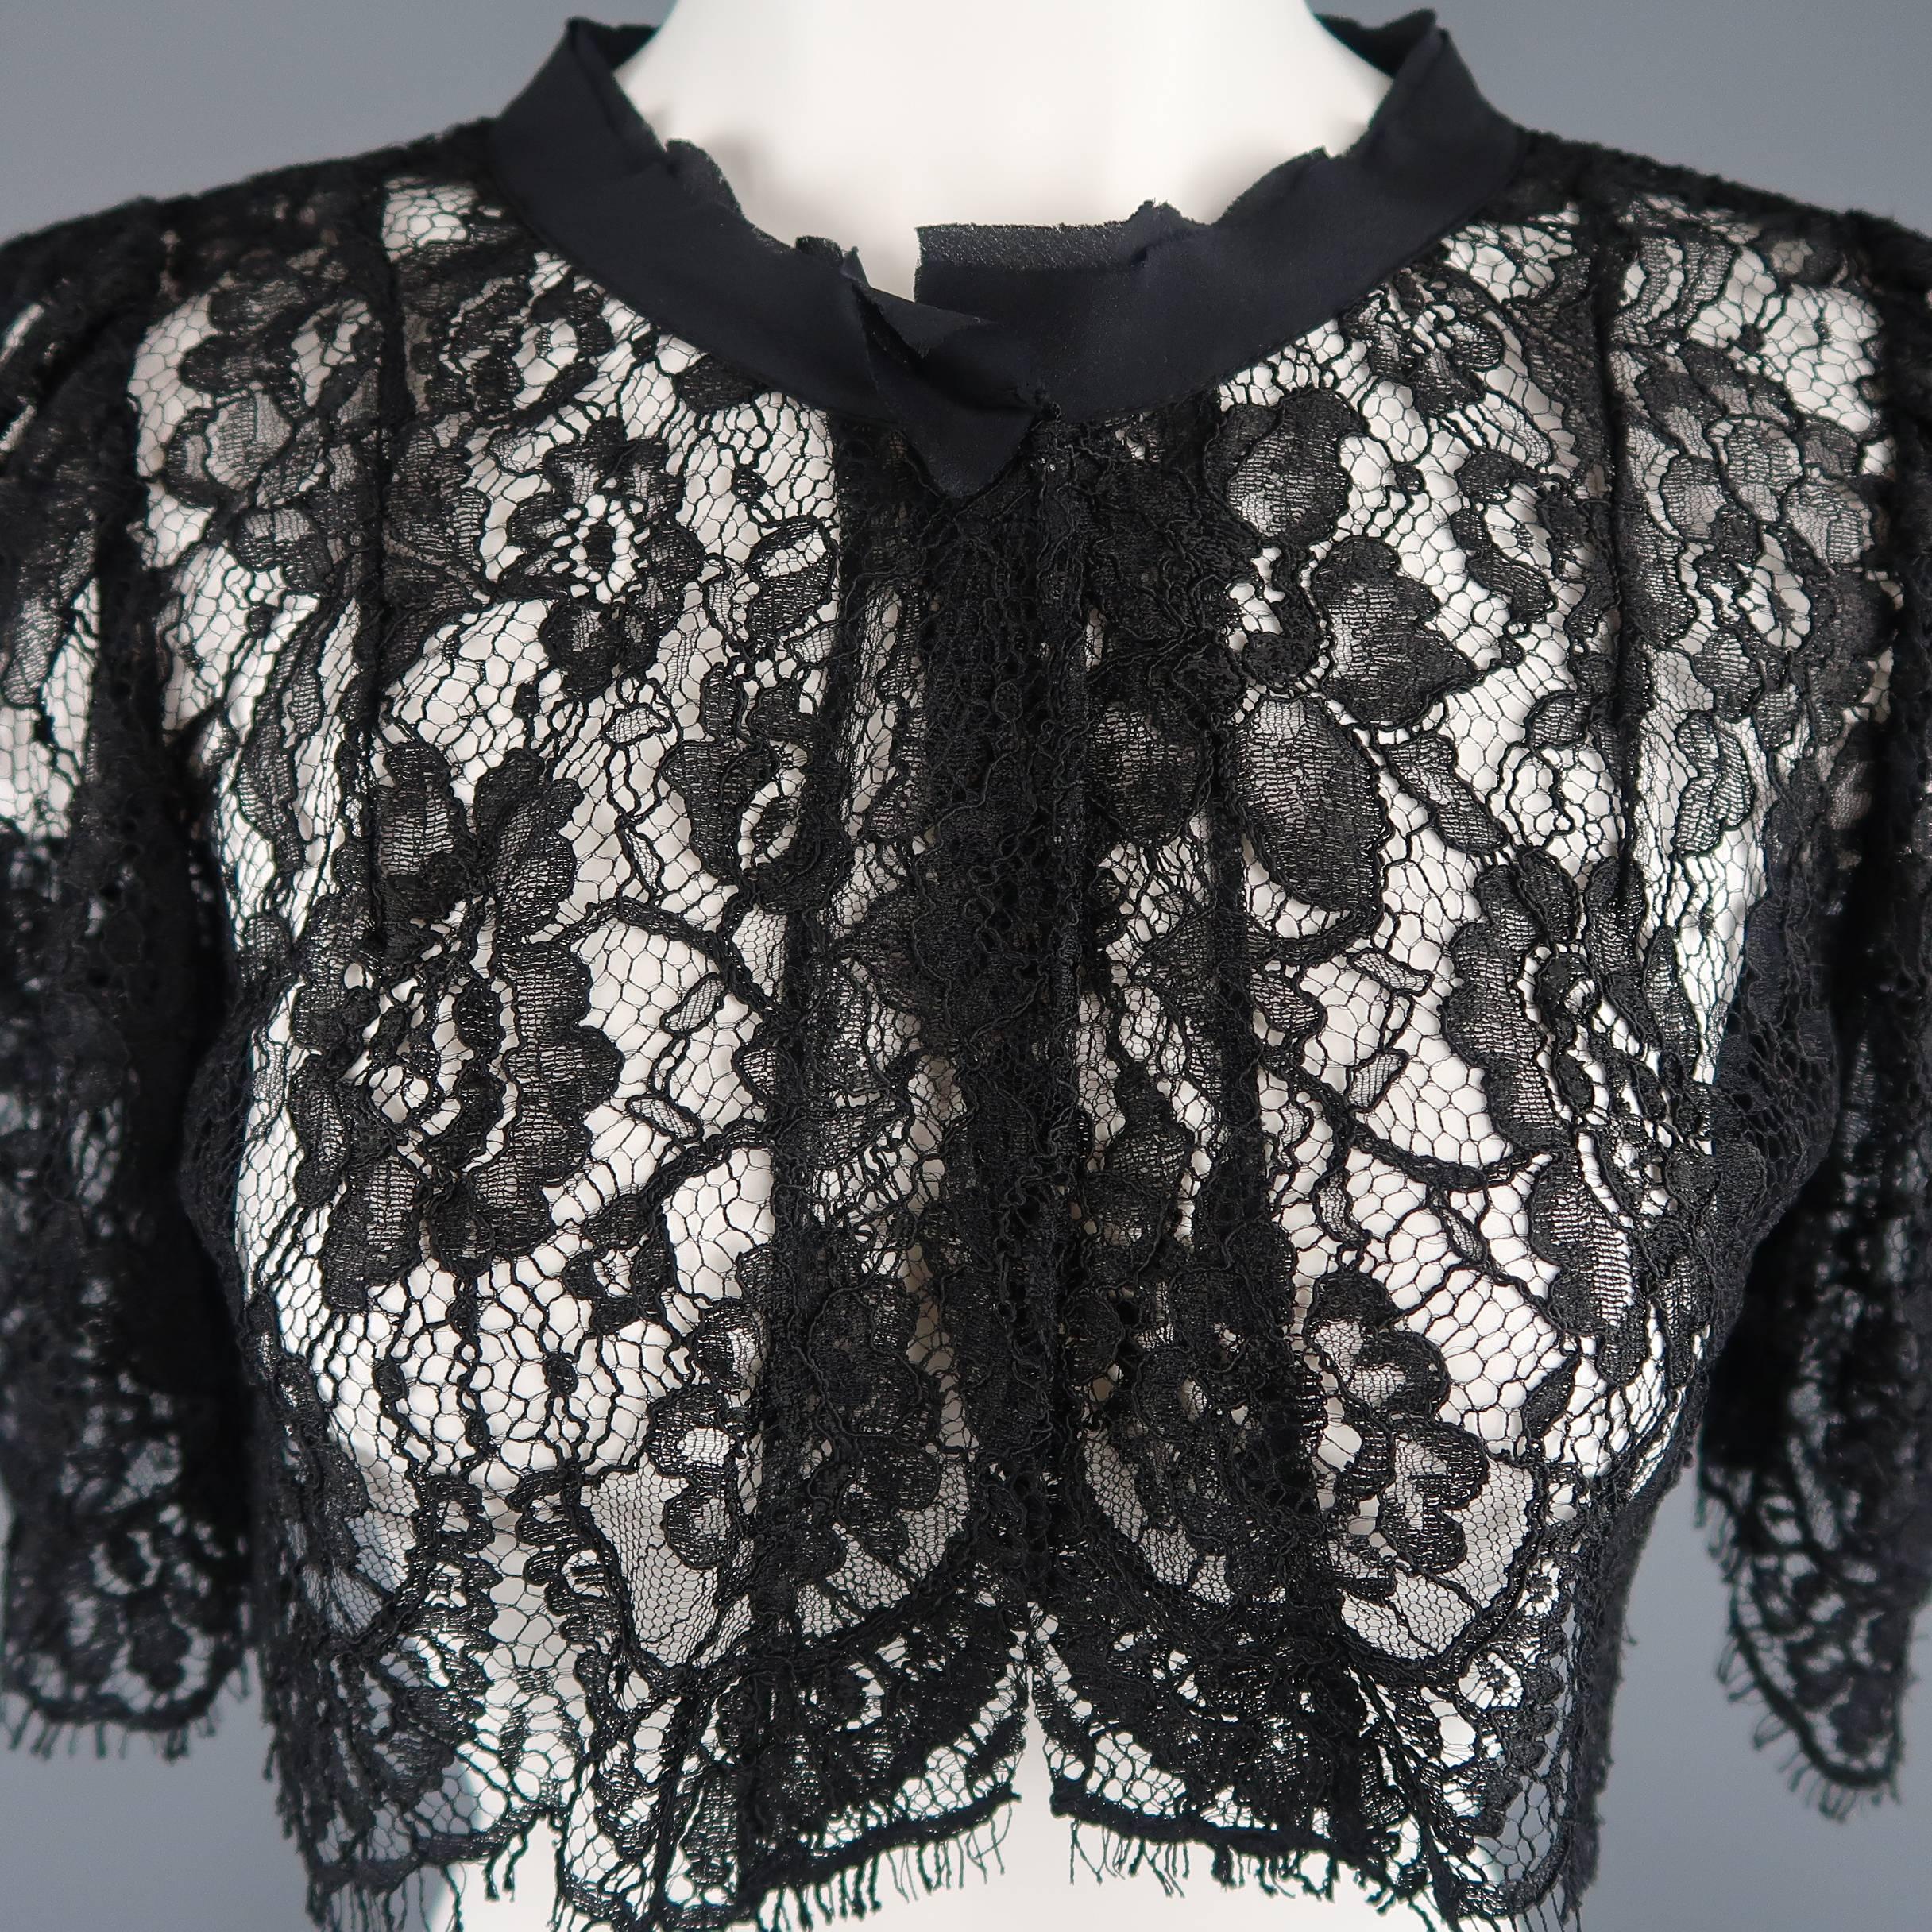 DOLCE & GABBANA bolero capelet comes in floral lace with a raw edge chiffon stand up trim collar, single snap closure, and short puff sleeves. Care tag cut out. Made in Italy.
 
Good Pre-Owned Condition.
Marked: IT 42
 
Measurements:
 
Shoulder: